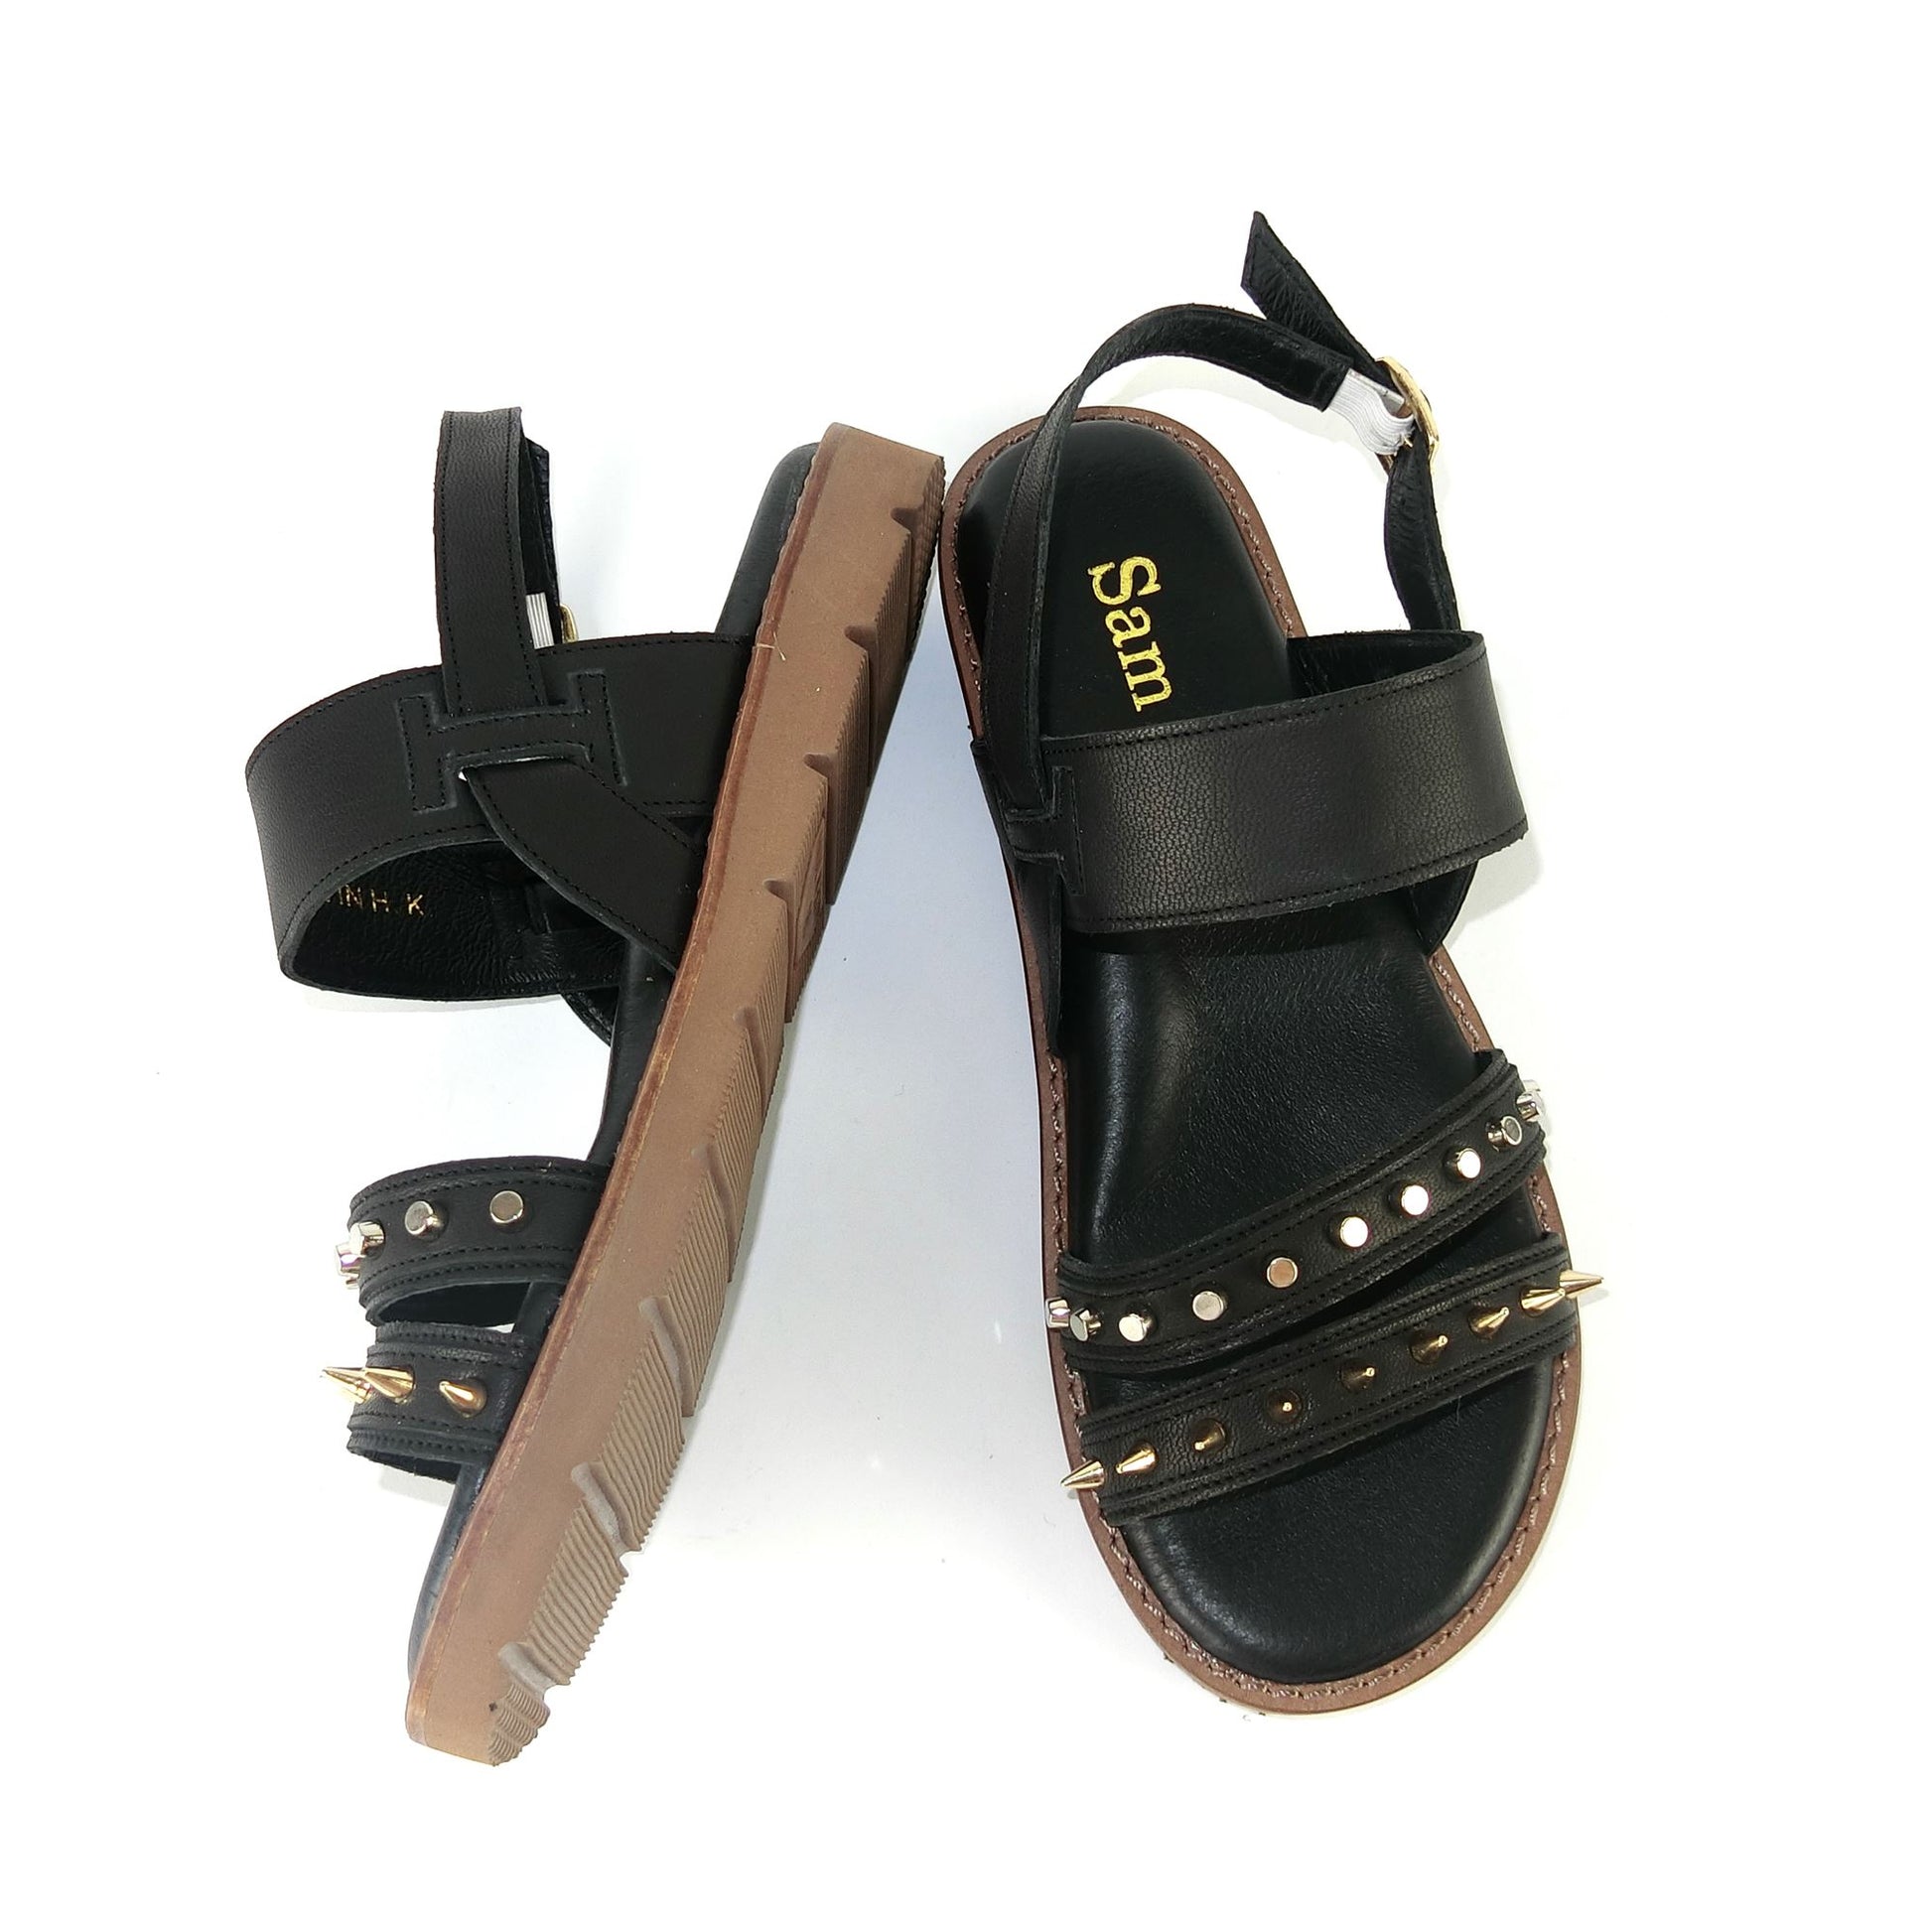 SS22018/19 Leather flat sandals with studs detail Sam Star Shoes 